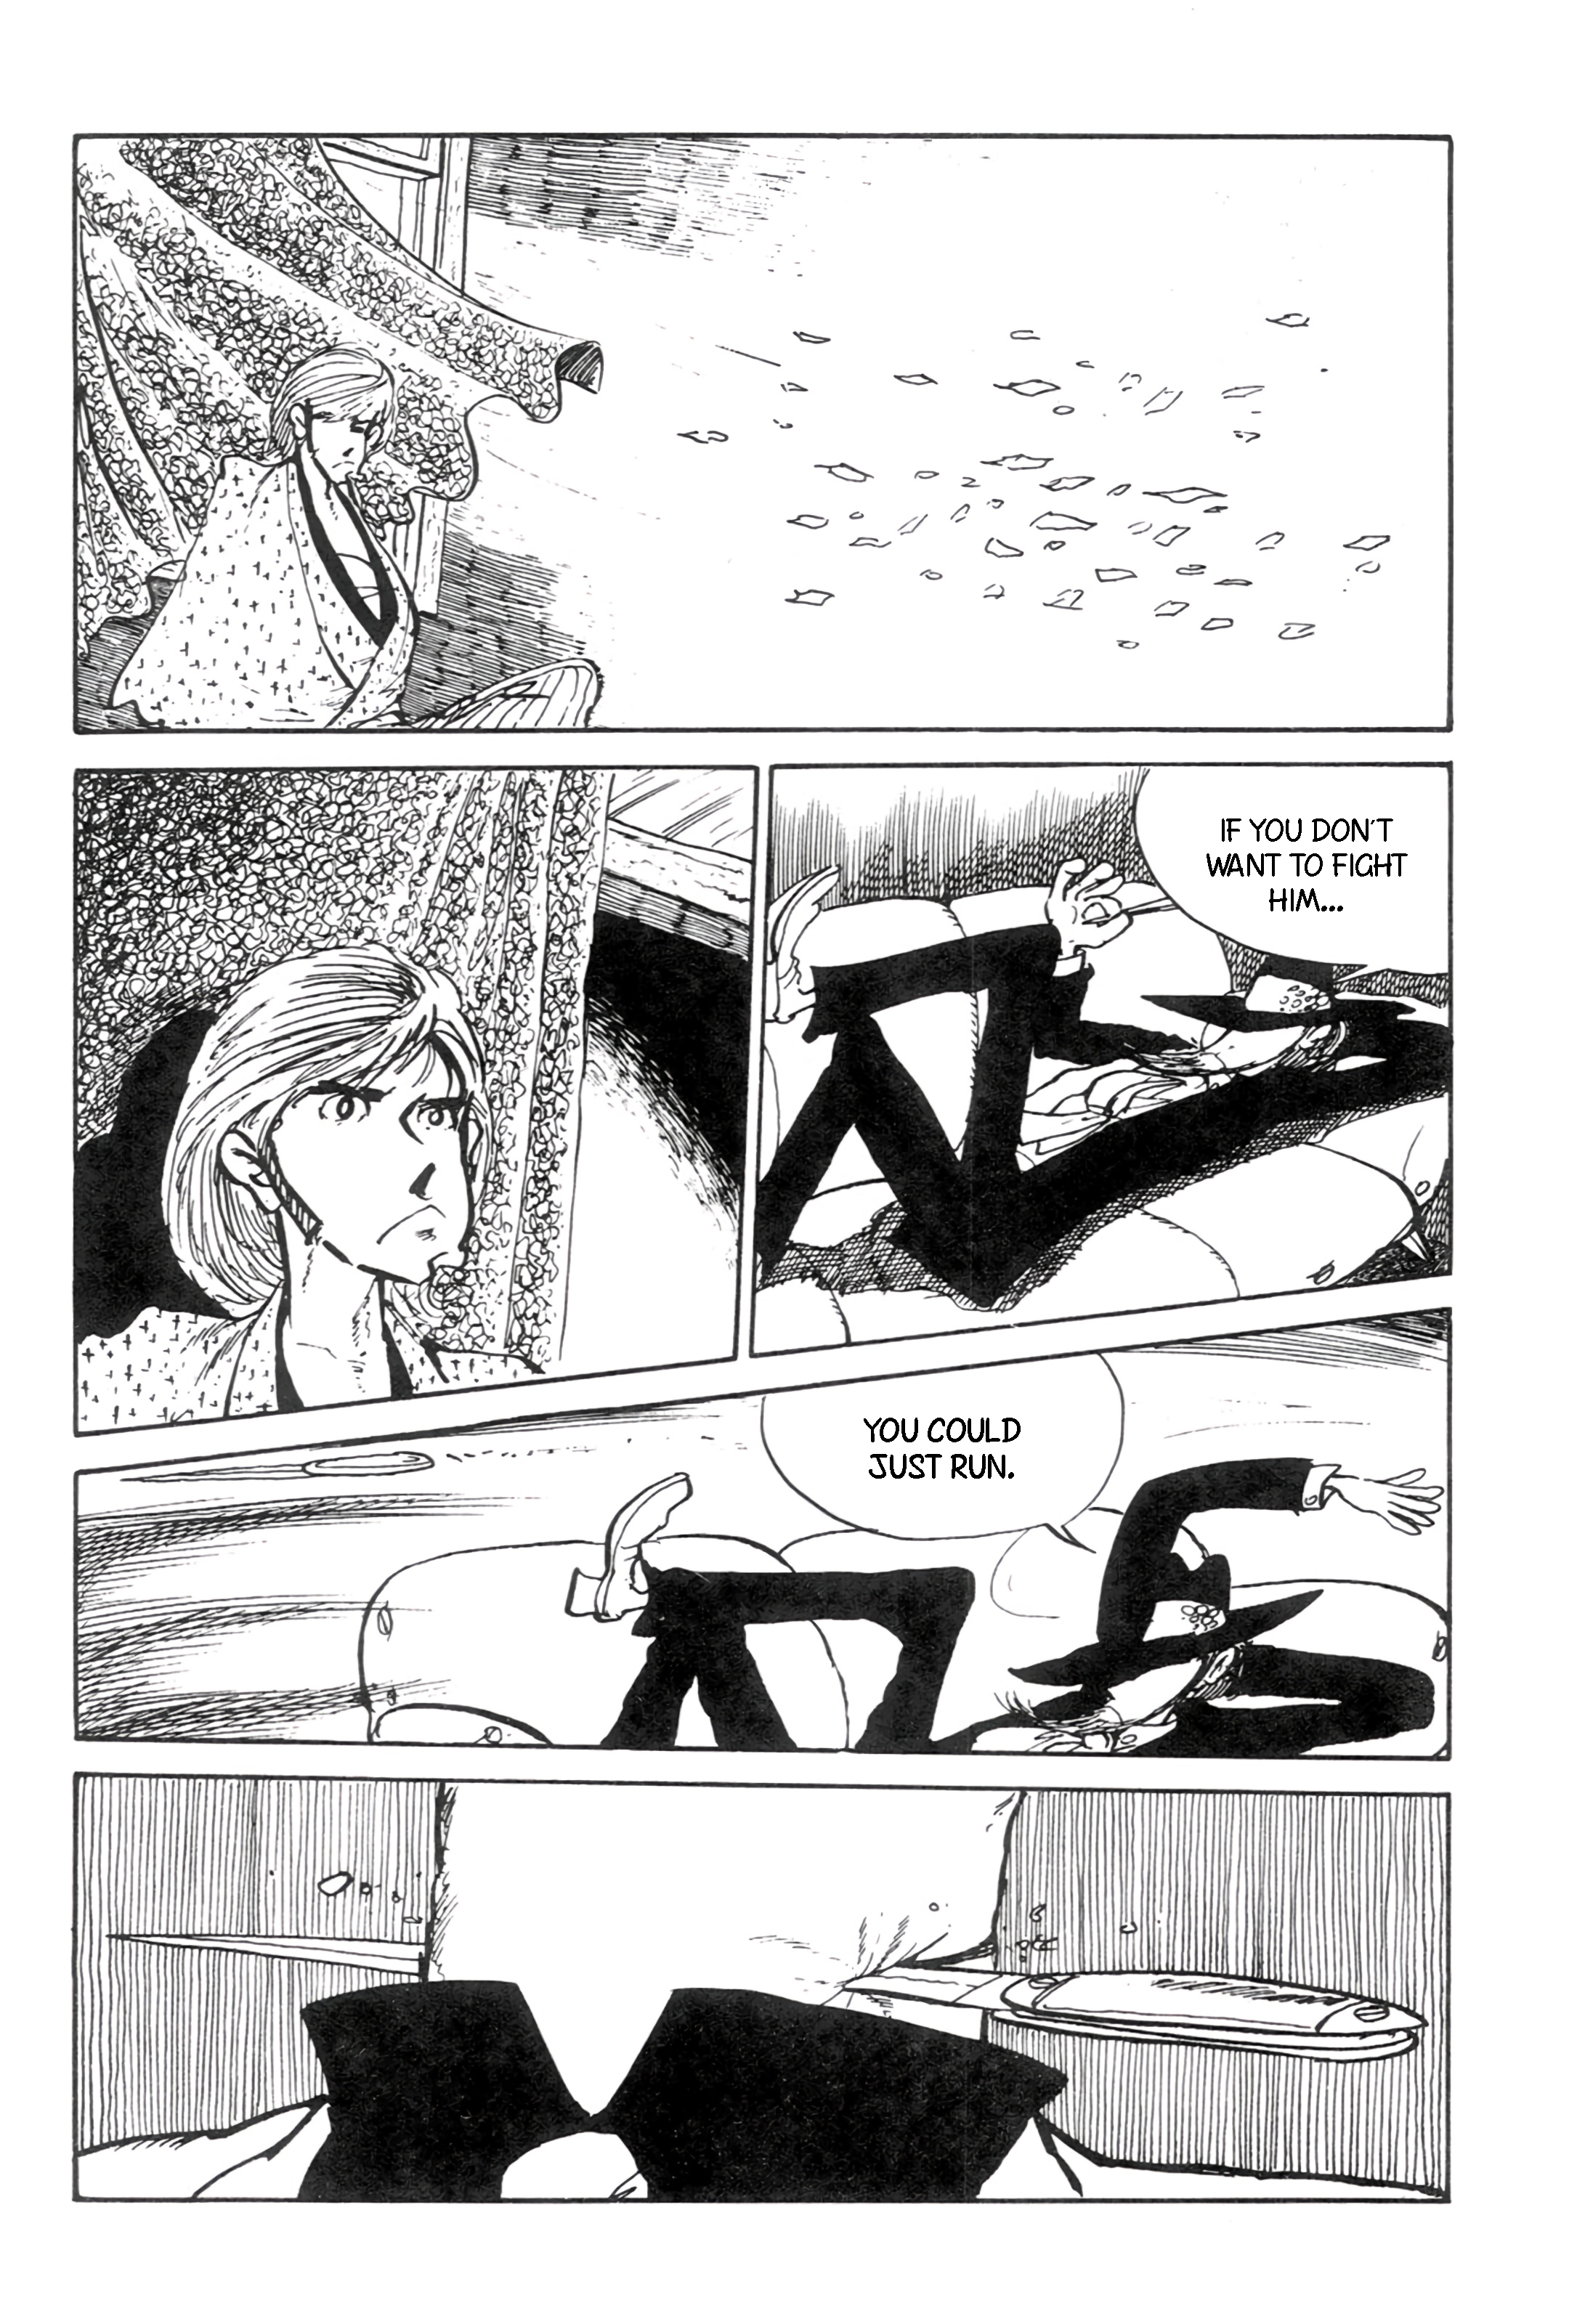 Lupin Iii: World’S Most Wanted - Page 4